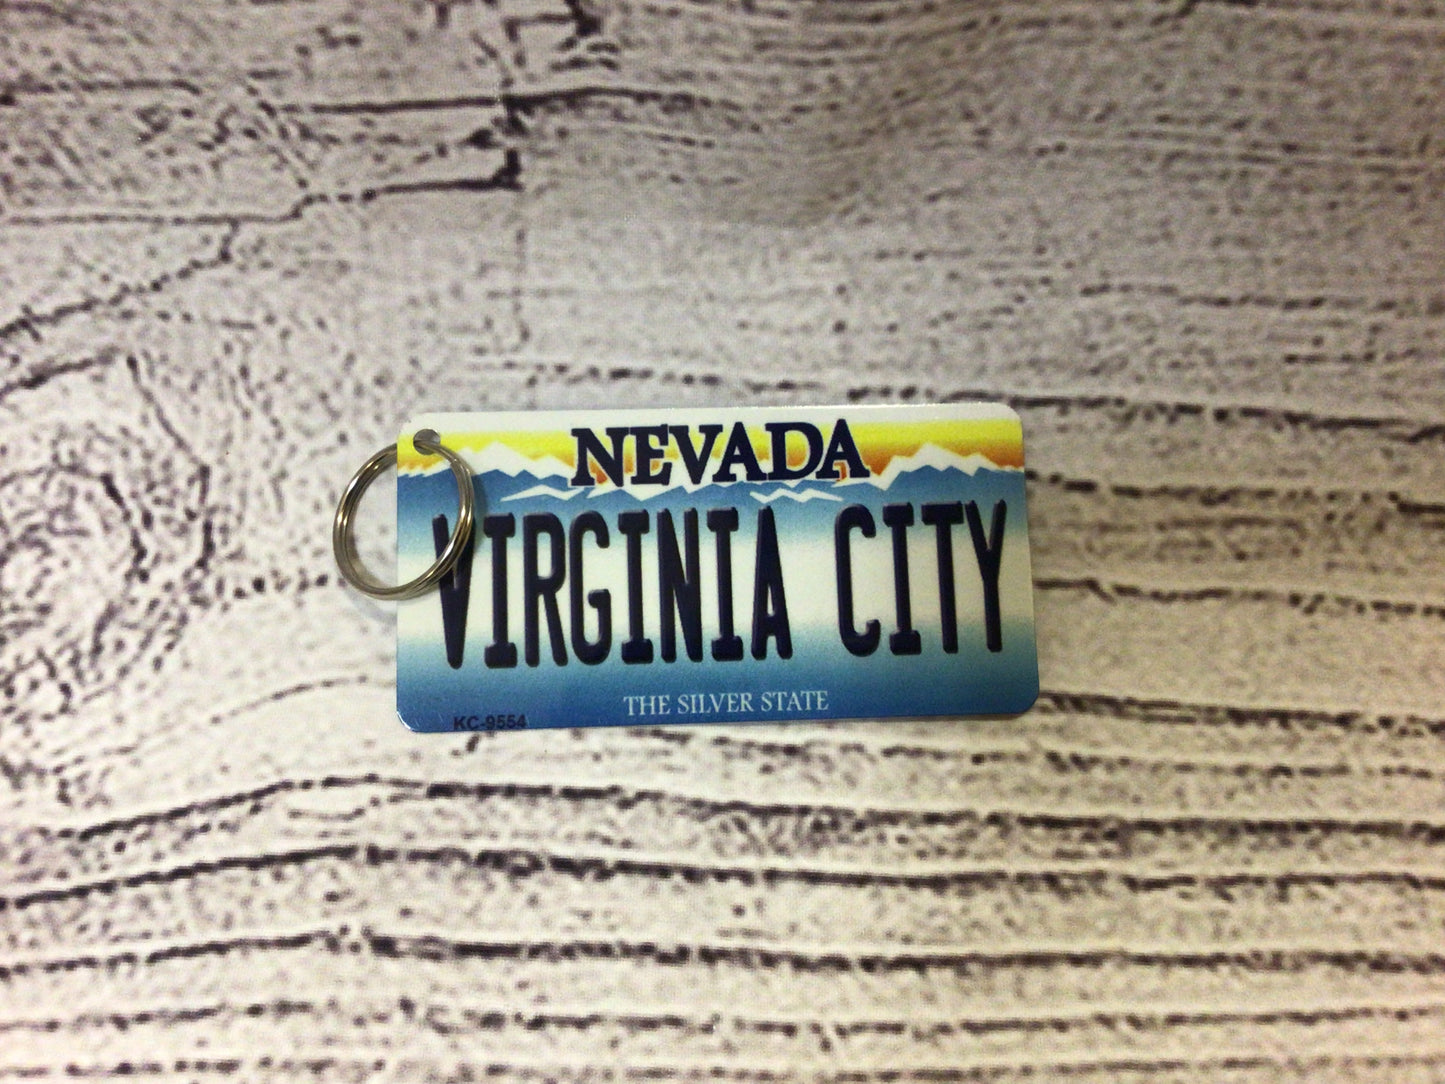 VC license plate keychain